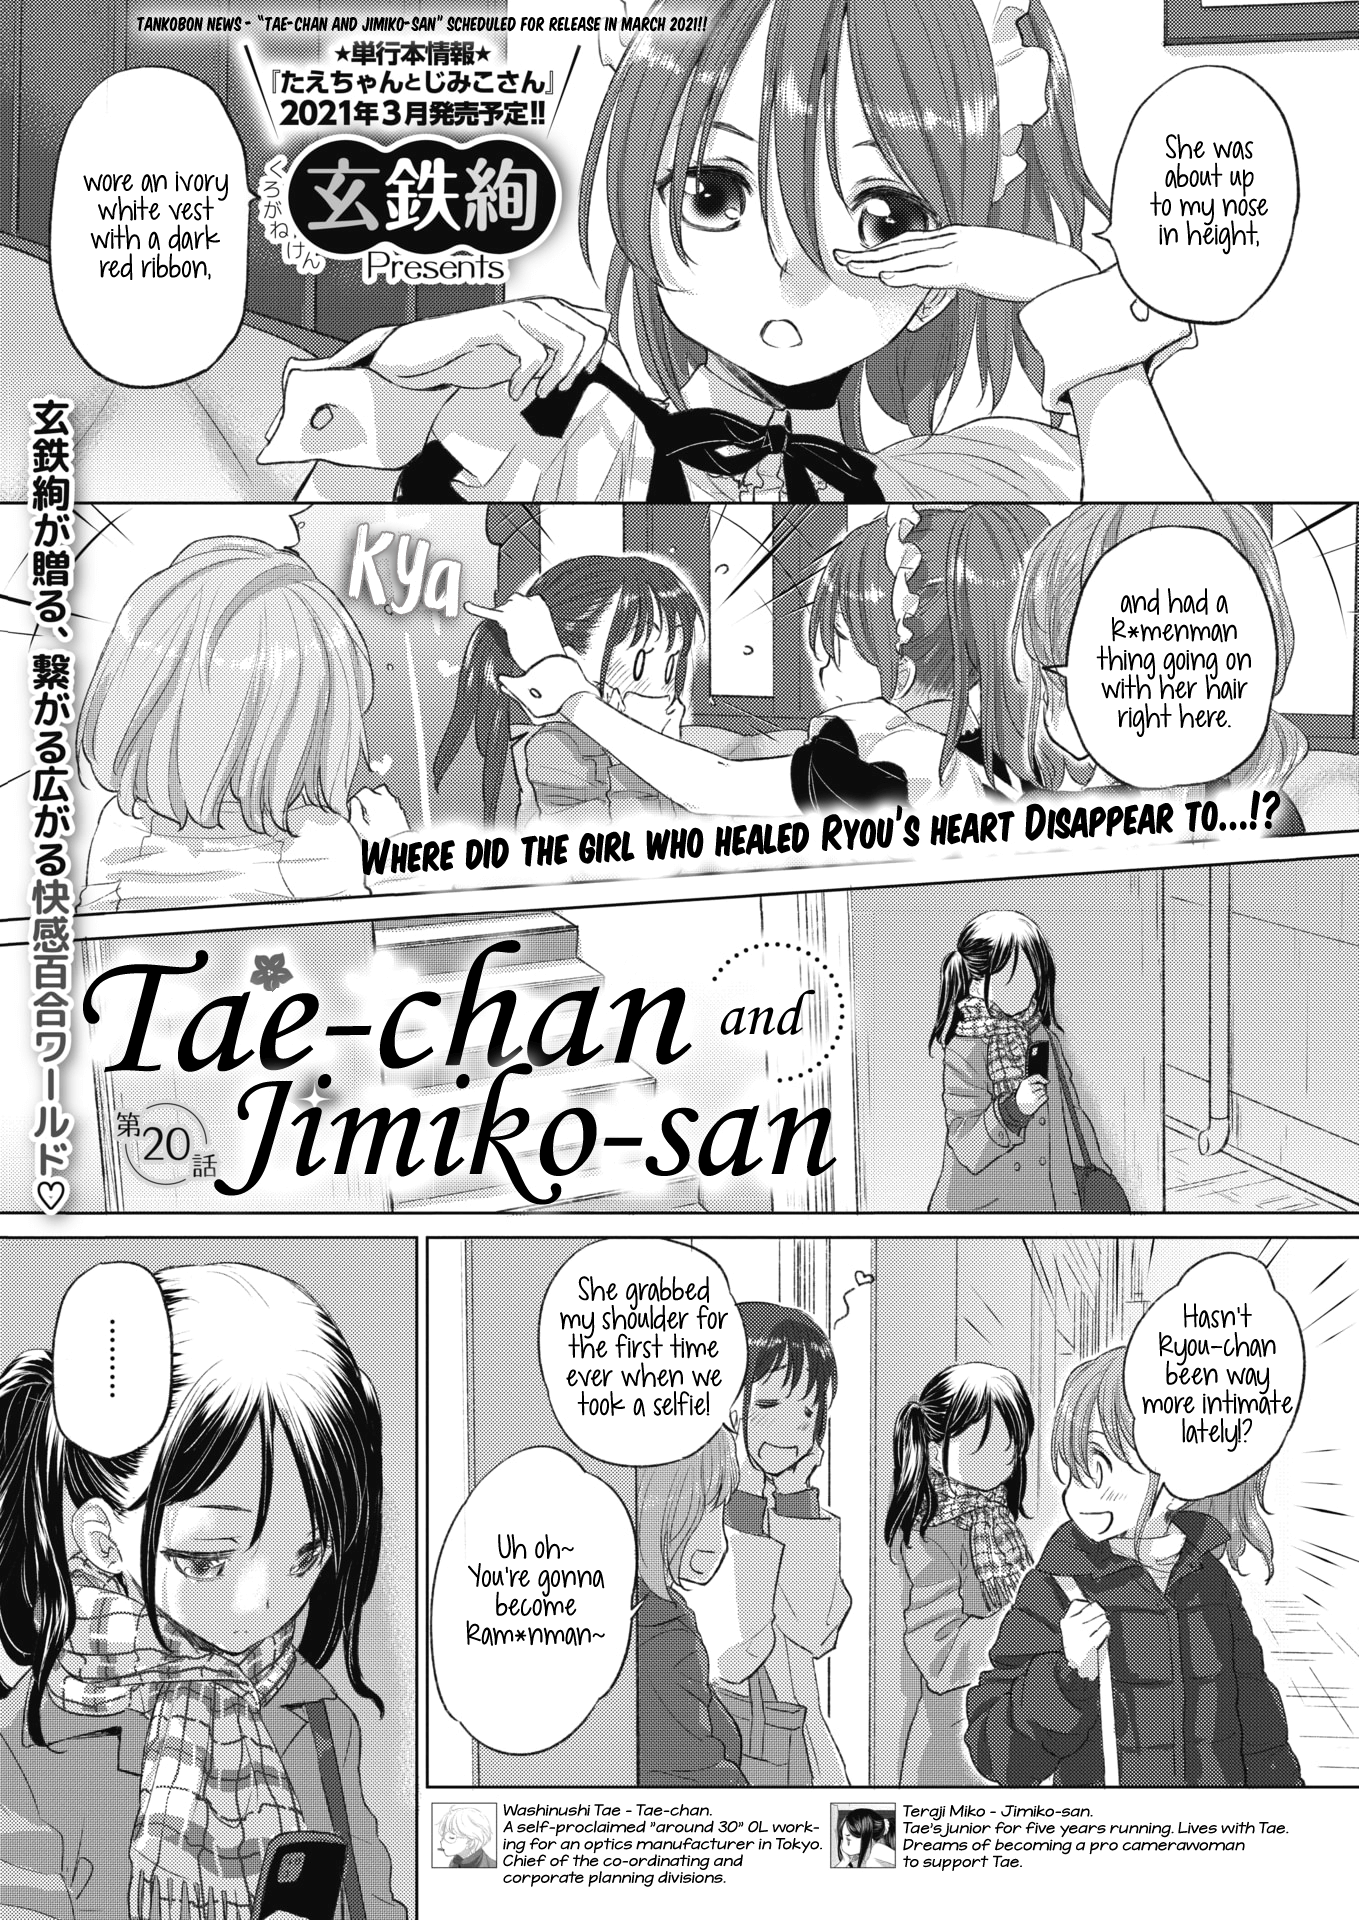 Tae-chan and Jimiko-san - Chapter 20 Page 1